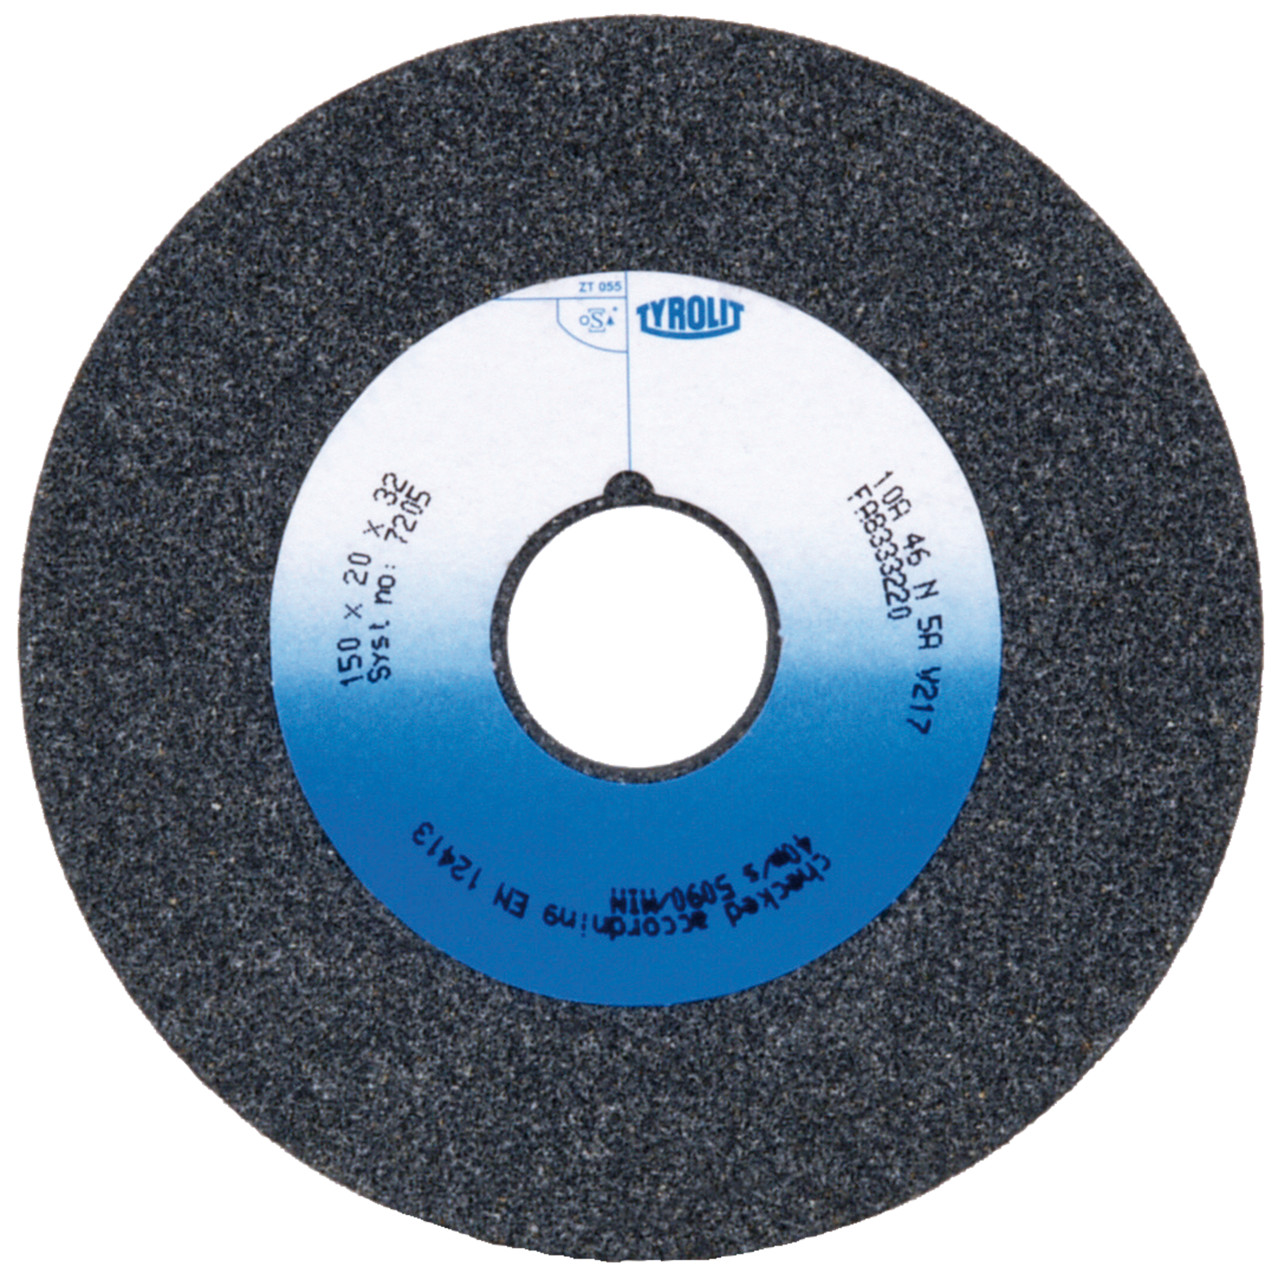 Tyrolit Conventional ceramic grinding discs DxDxH 250x25x40 For unalloyed and low-alloy steels, shape: 1, Art. 34046764